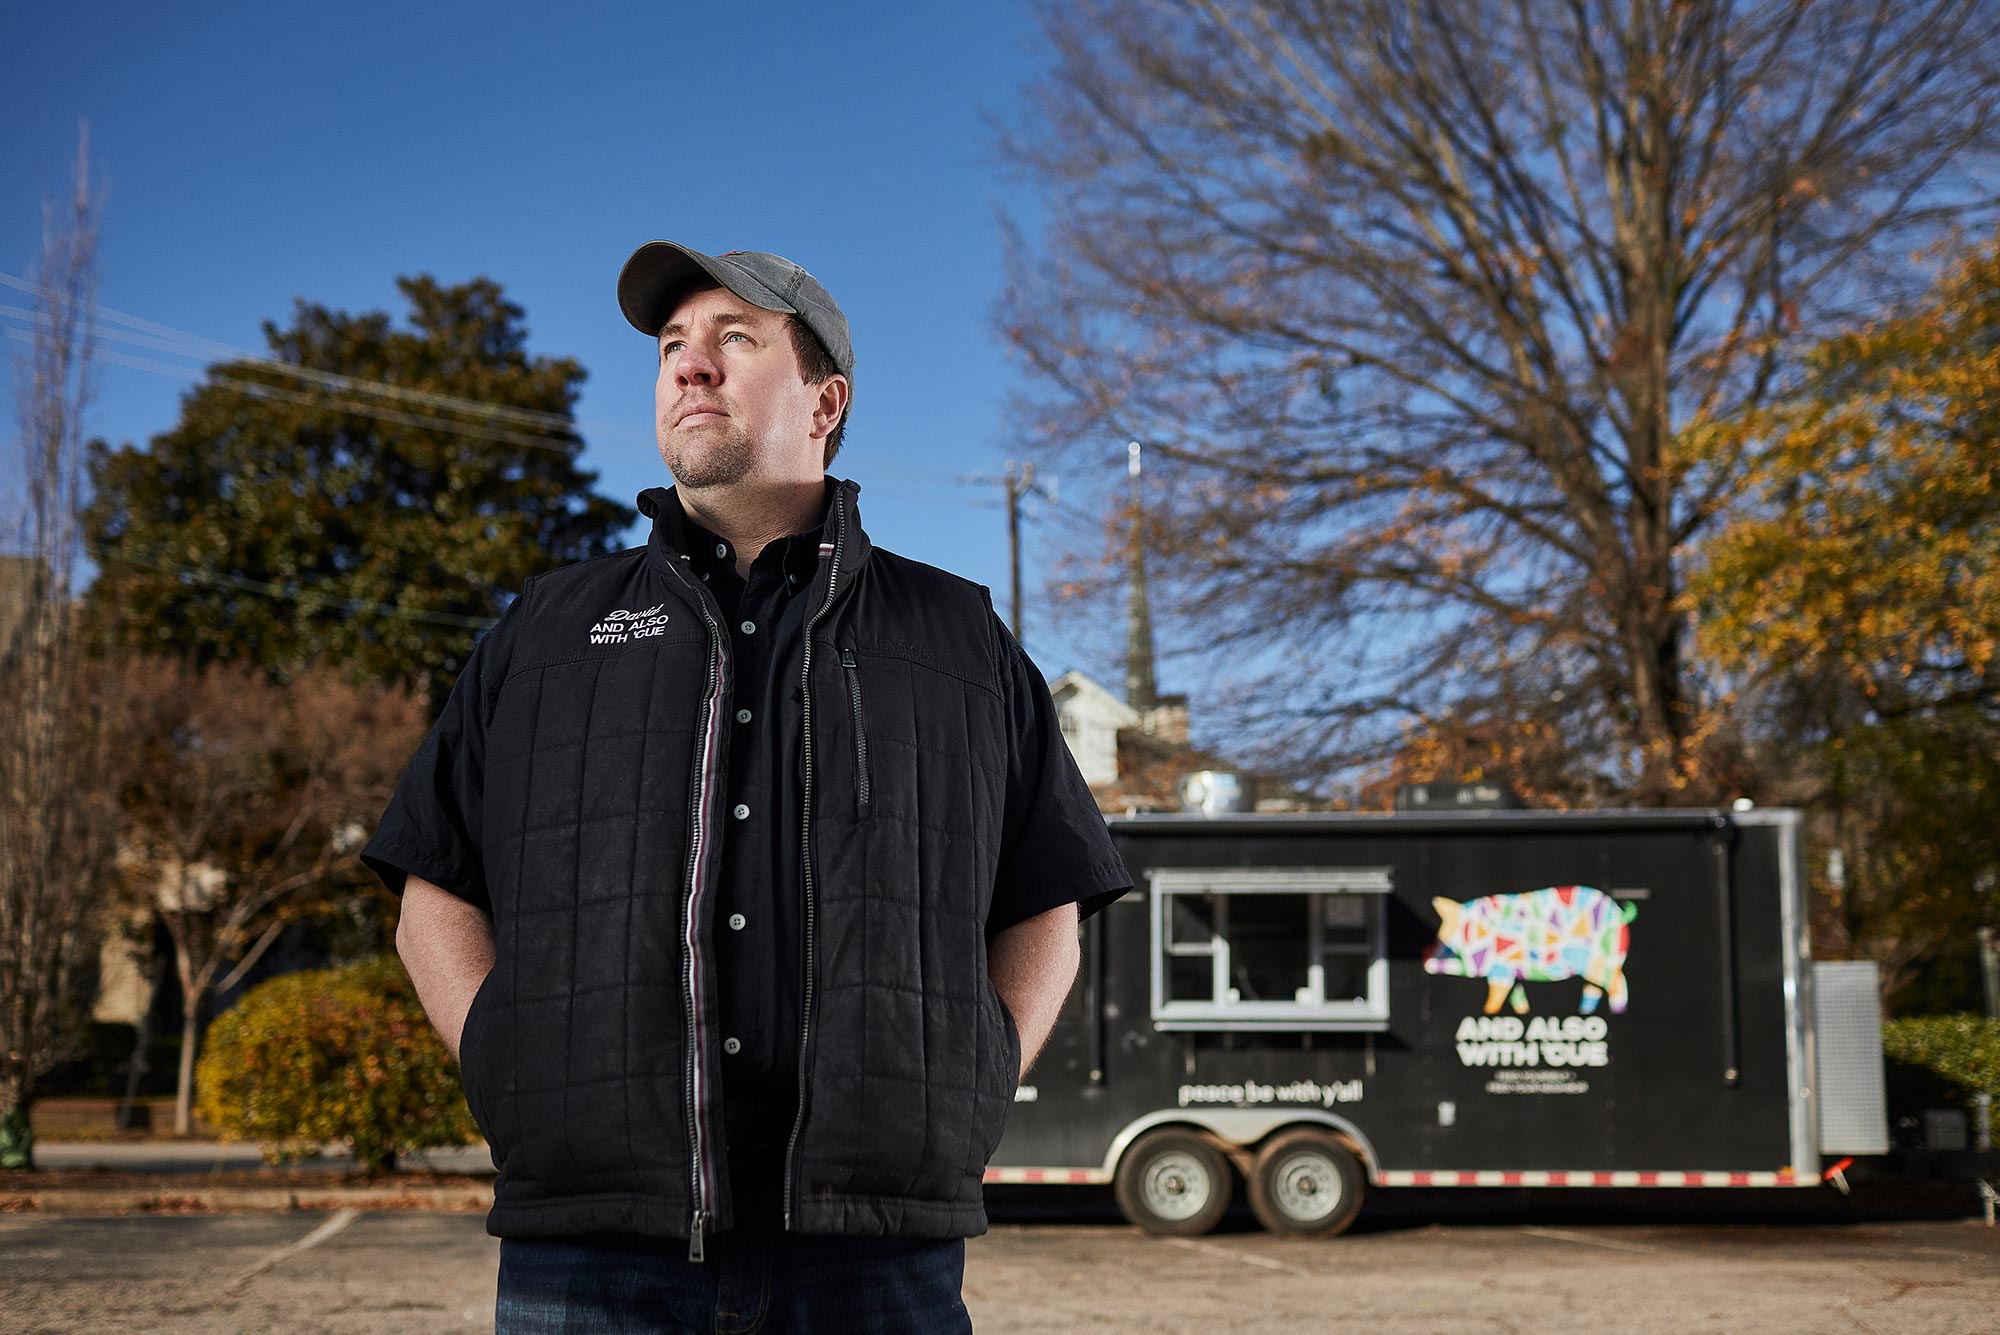 Photo of David With in a black vest, shirt, and baseball cap, standing with his hands in his pockets and looking off to the side. His the black trailer where he runs his BBQ business out of is behind him; blue sky and trees are seen in the background.